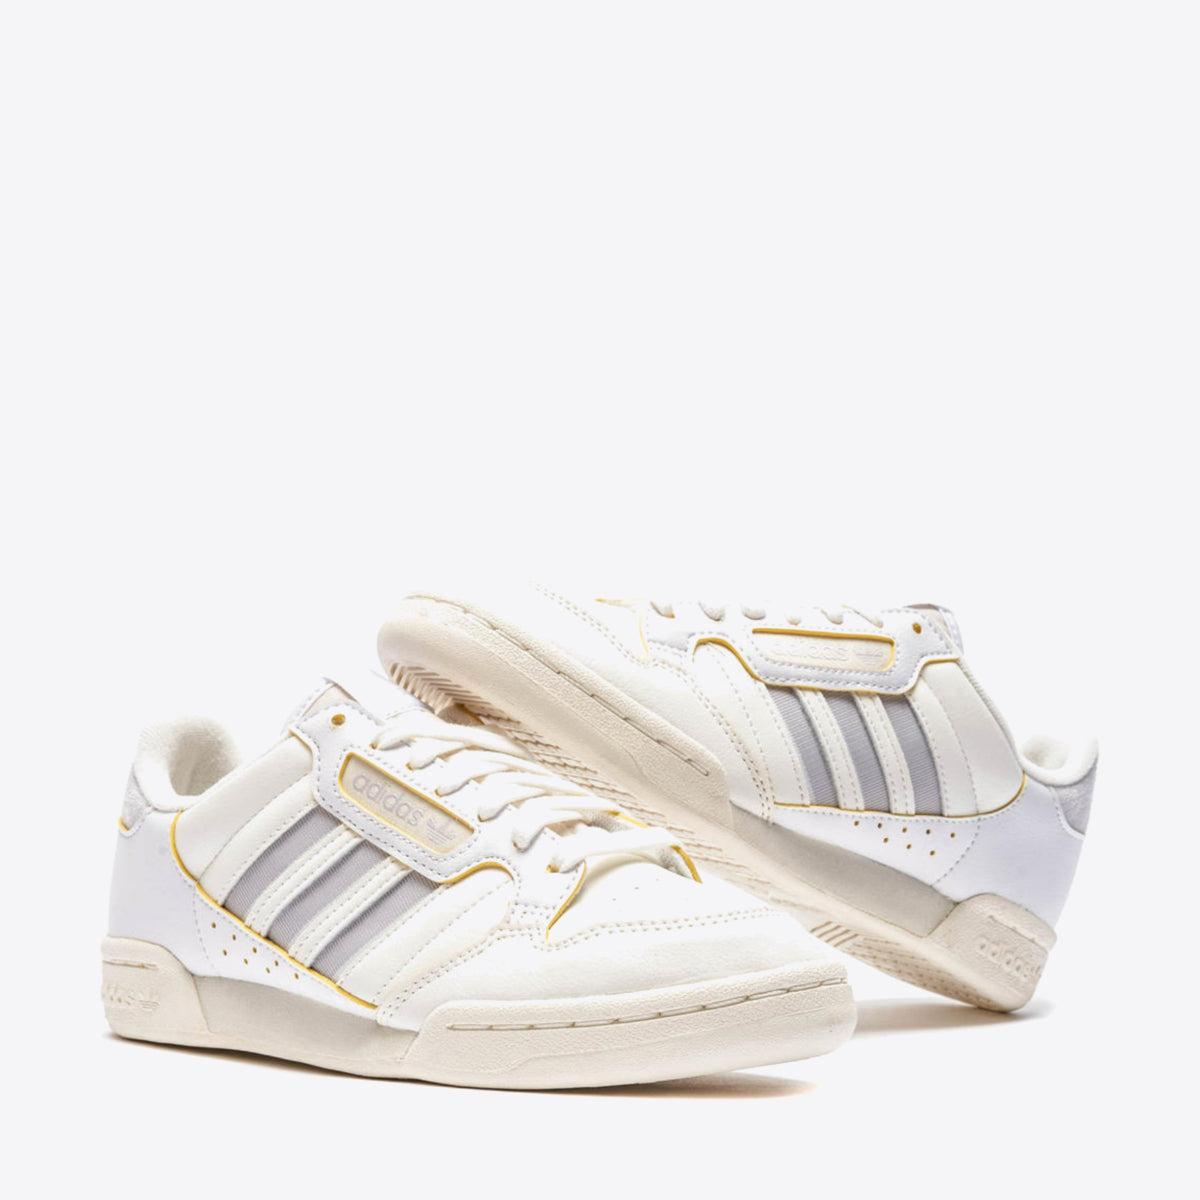  Continental 80 Stripes Cloud White/Grey/Off White